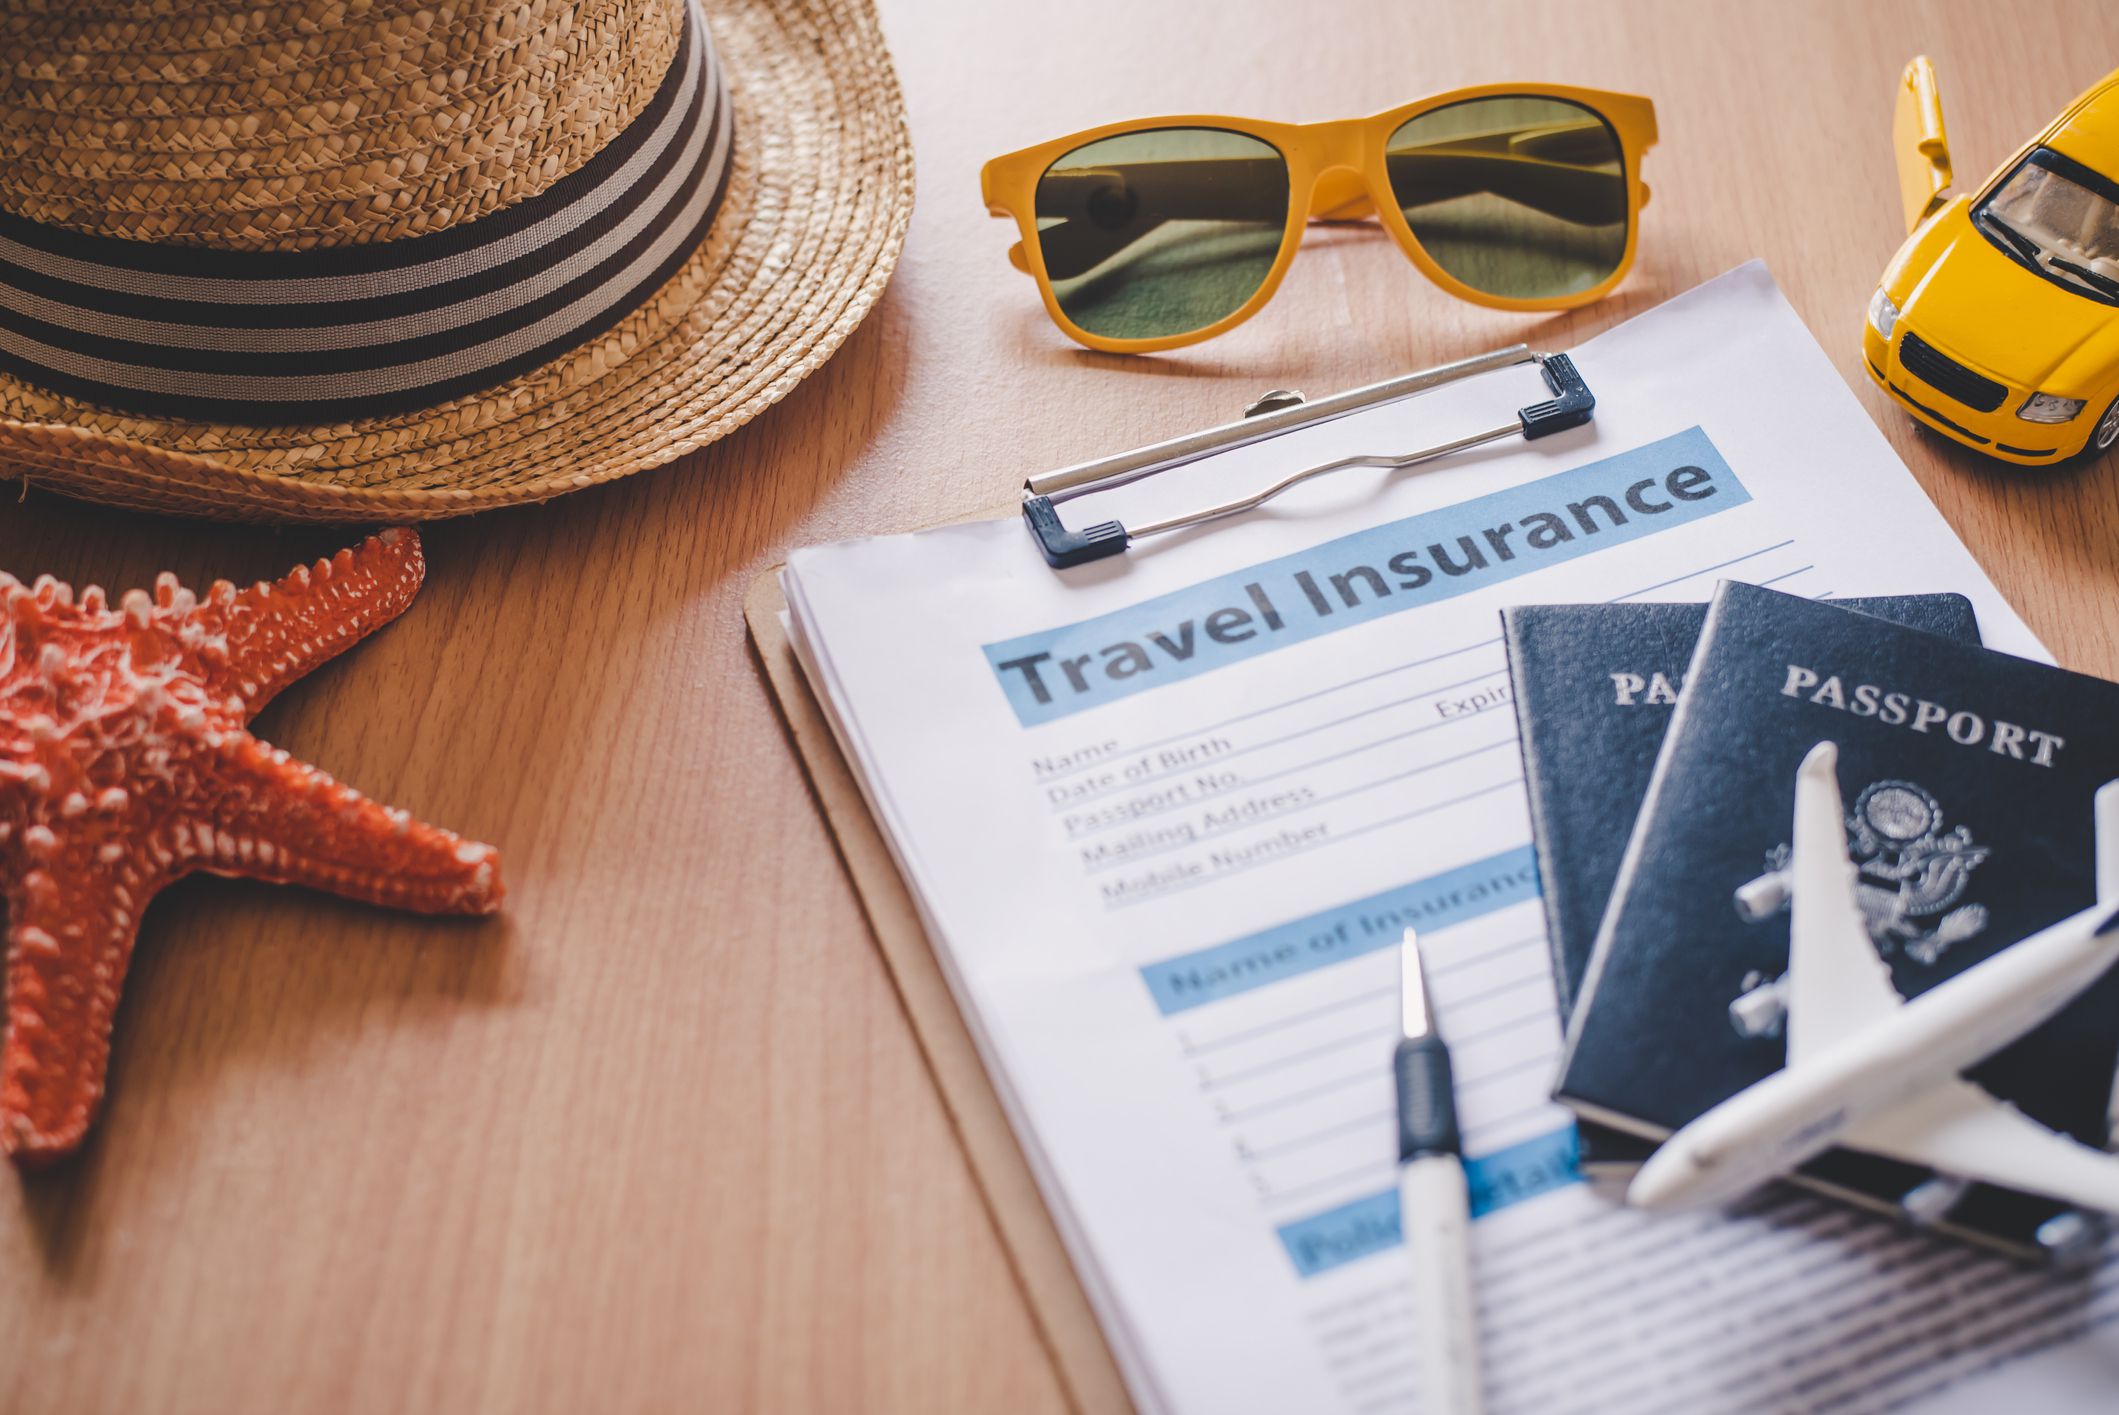 <p>Many policies cover travel interruption and illness, but some also cover theft. “Travel insurance is vital for health issues and accidents/injury abroad, but in many cases can also help you out if your stuff gets stolen, too,” according to the travel blog <a href="https://www.dangerous-business.com/">A Dangerous Business</a>.</p><b>Related: </b><a href="https://blog.cheapism.com/delayed-canceled-flights/">Your Flight Is Canceled or Delayed: What Can You Do?</a>